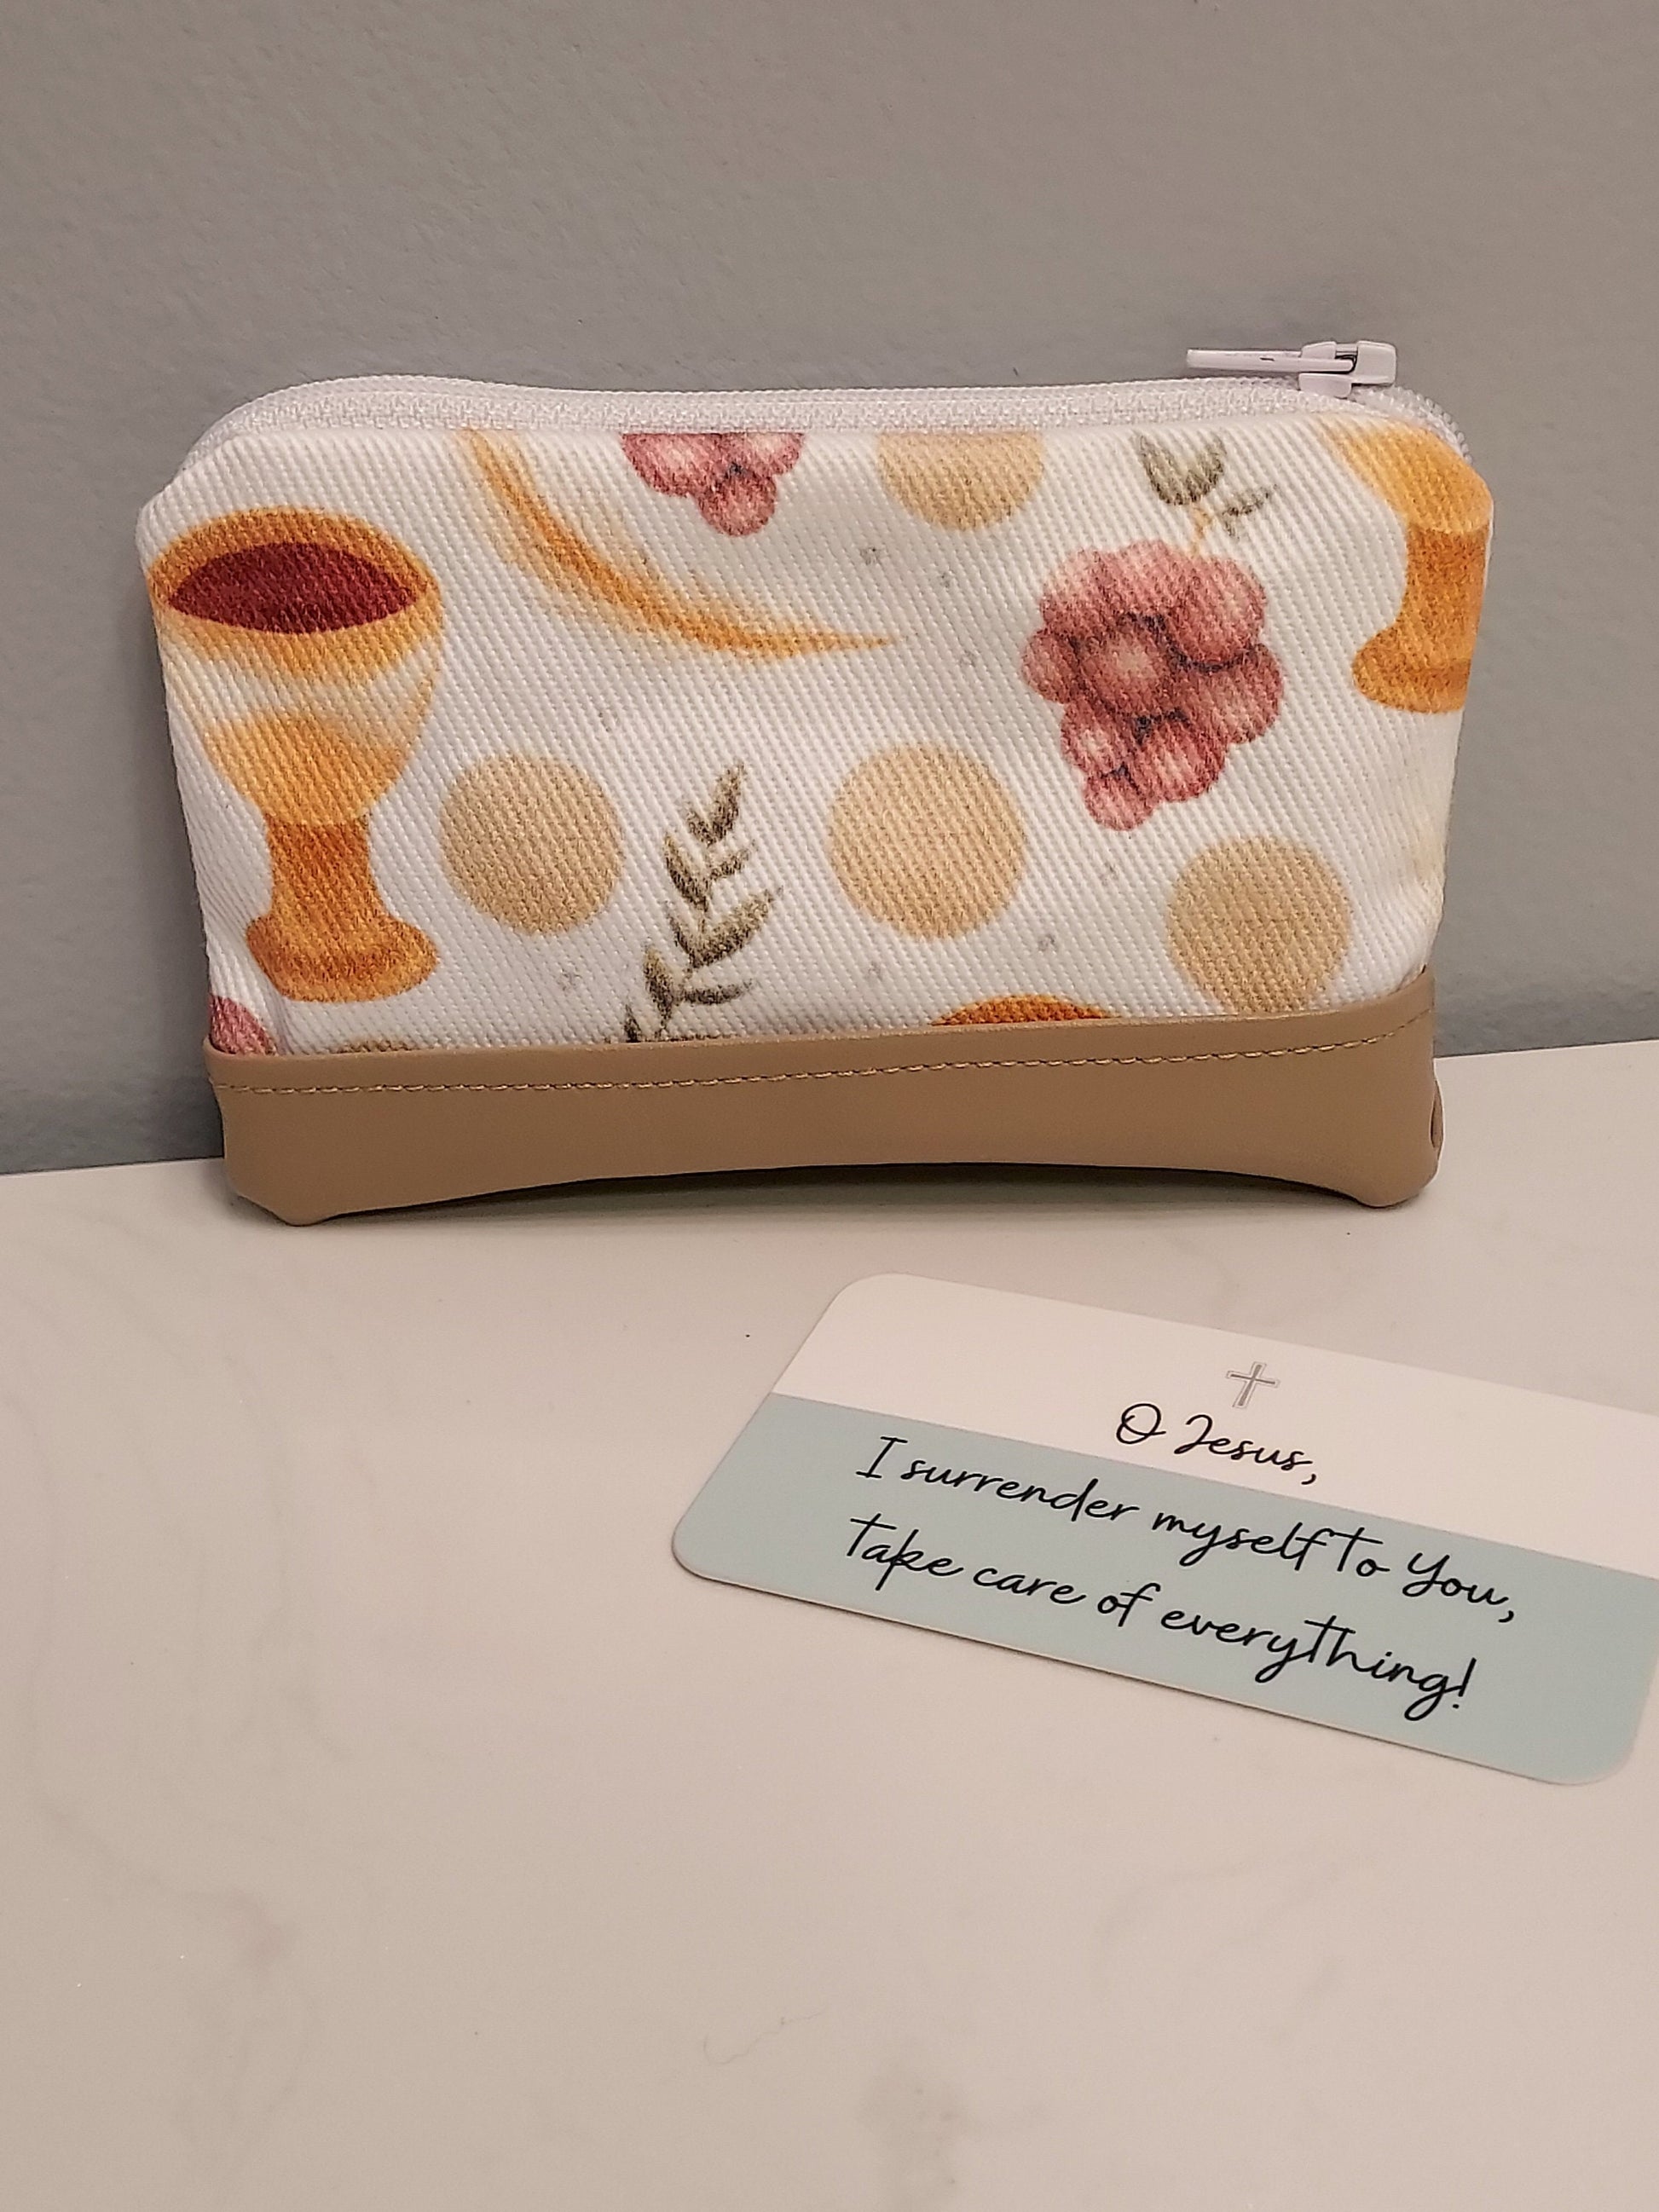 Wallet Holy Eucharist Catholic Fabric Rosary Pouch Gift card holder/Confirmation First Communion Easter gifts Rosary case